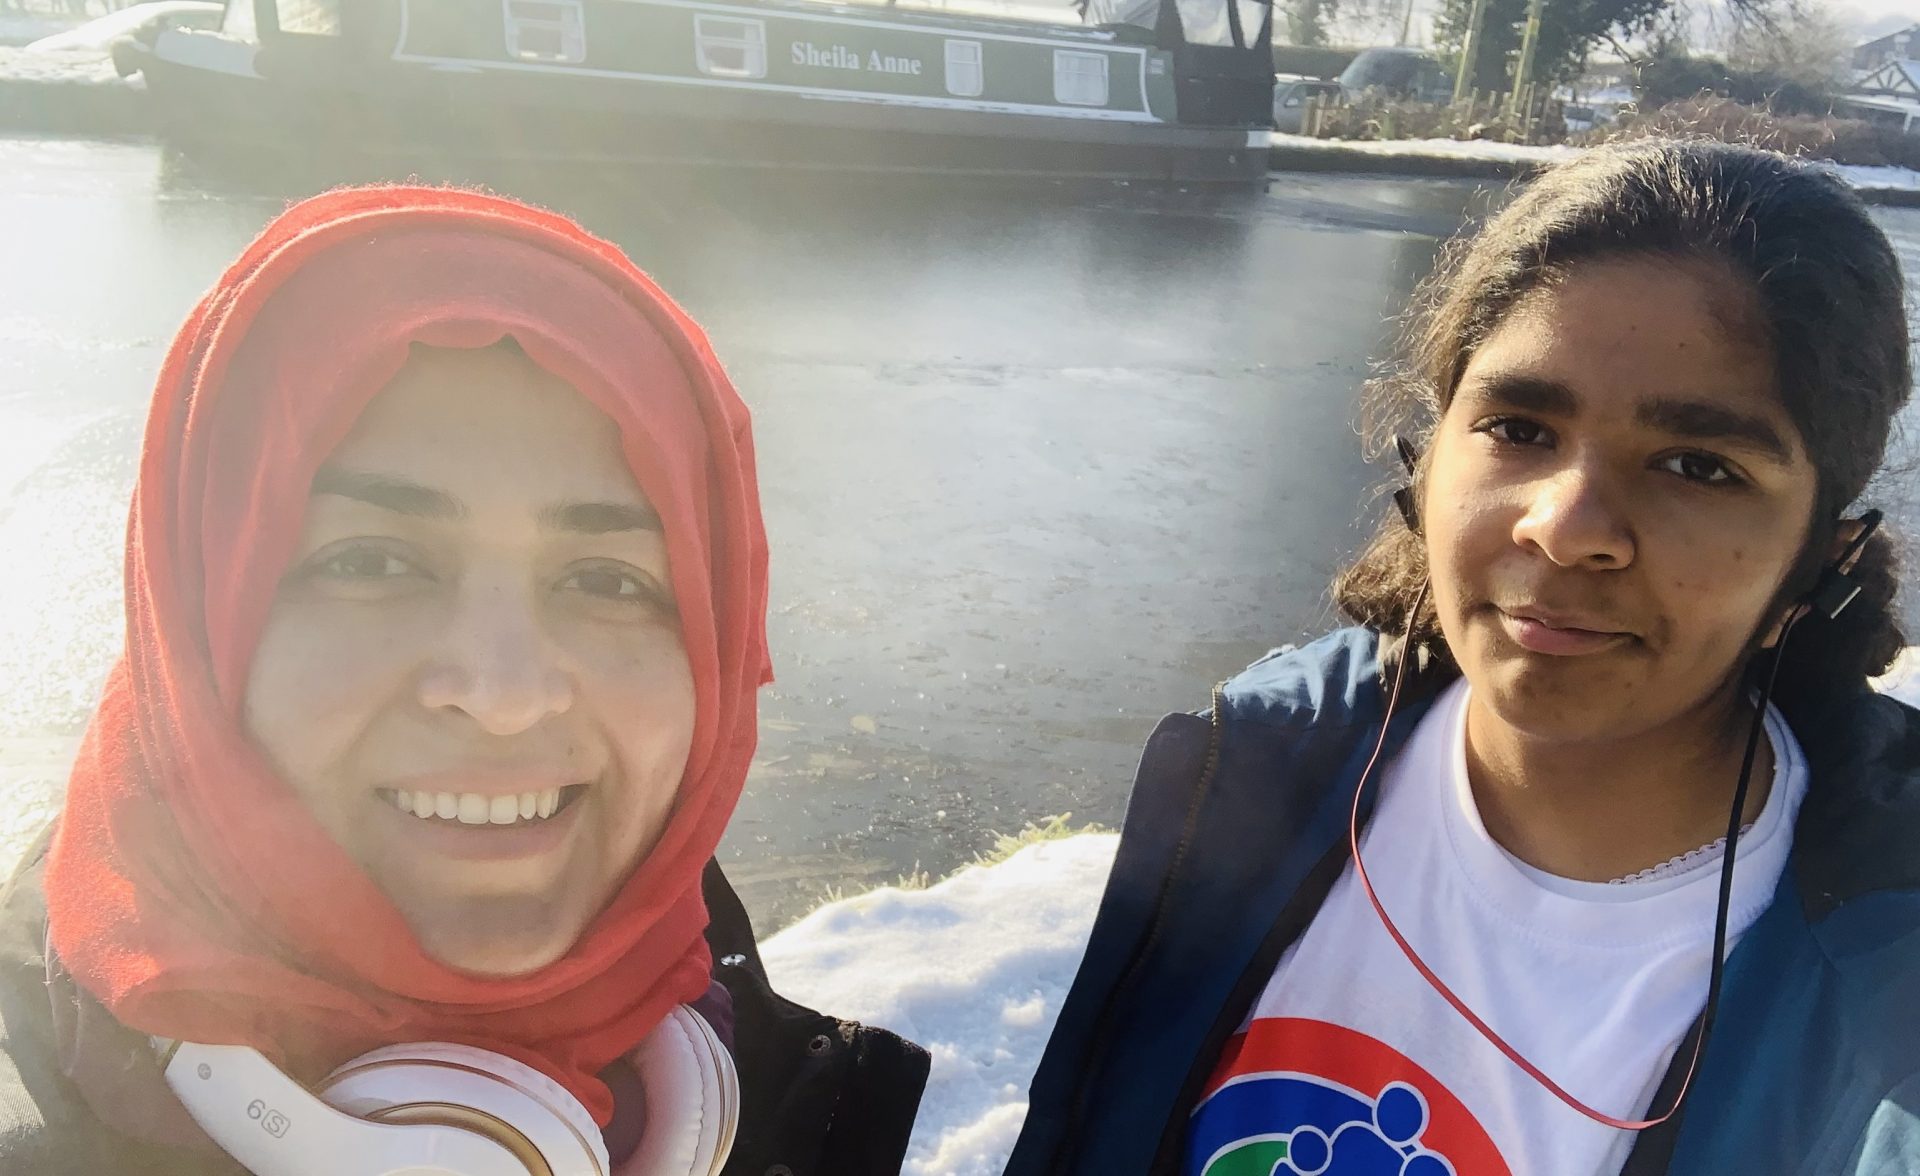 Mother and daughter smiling stood by frozen canal